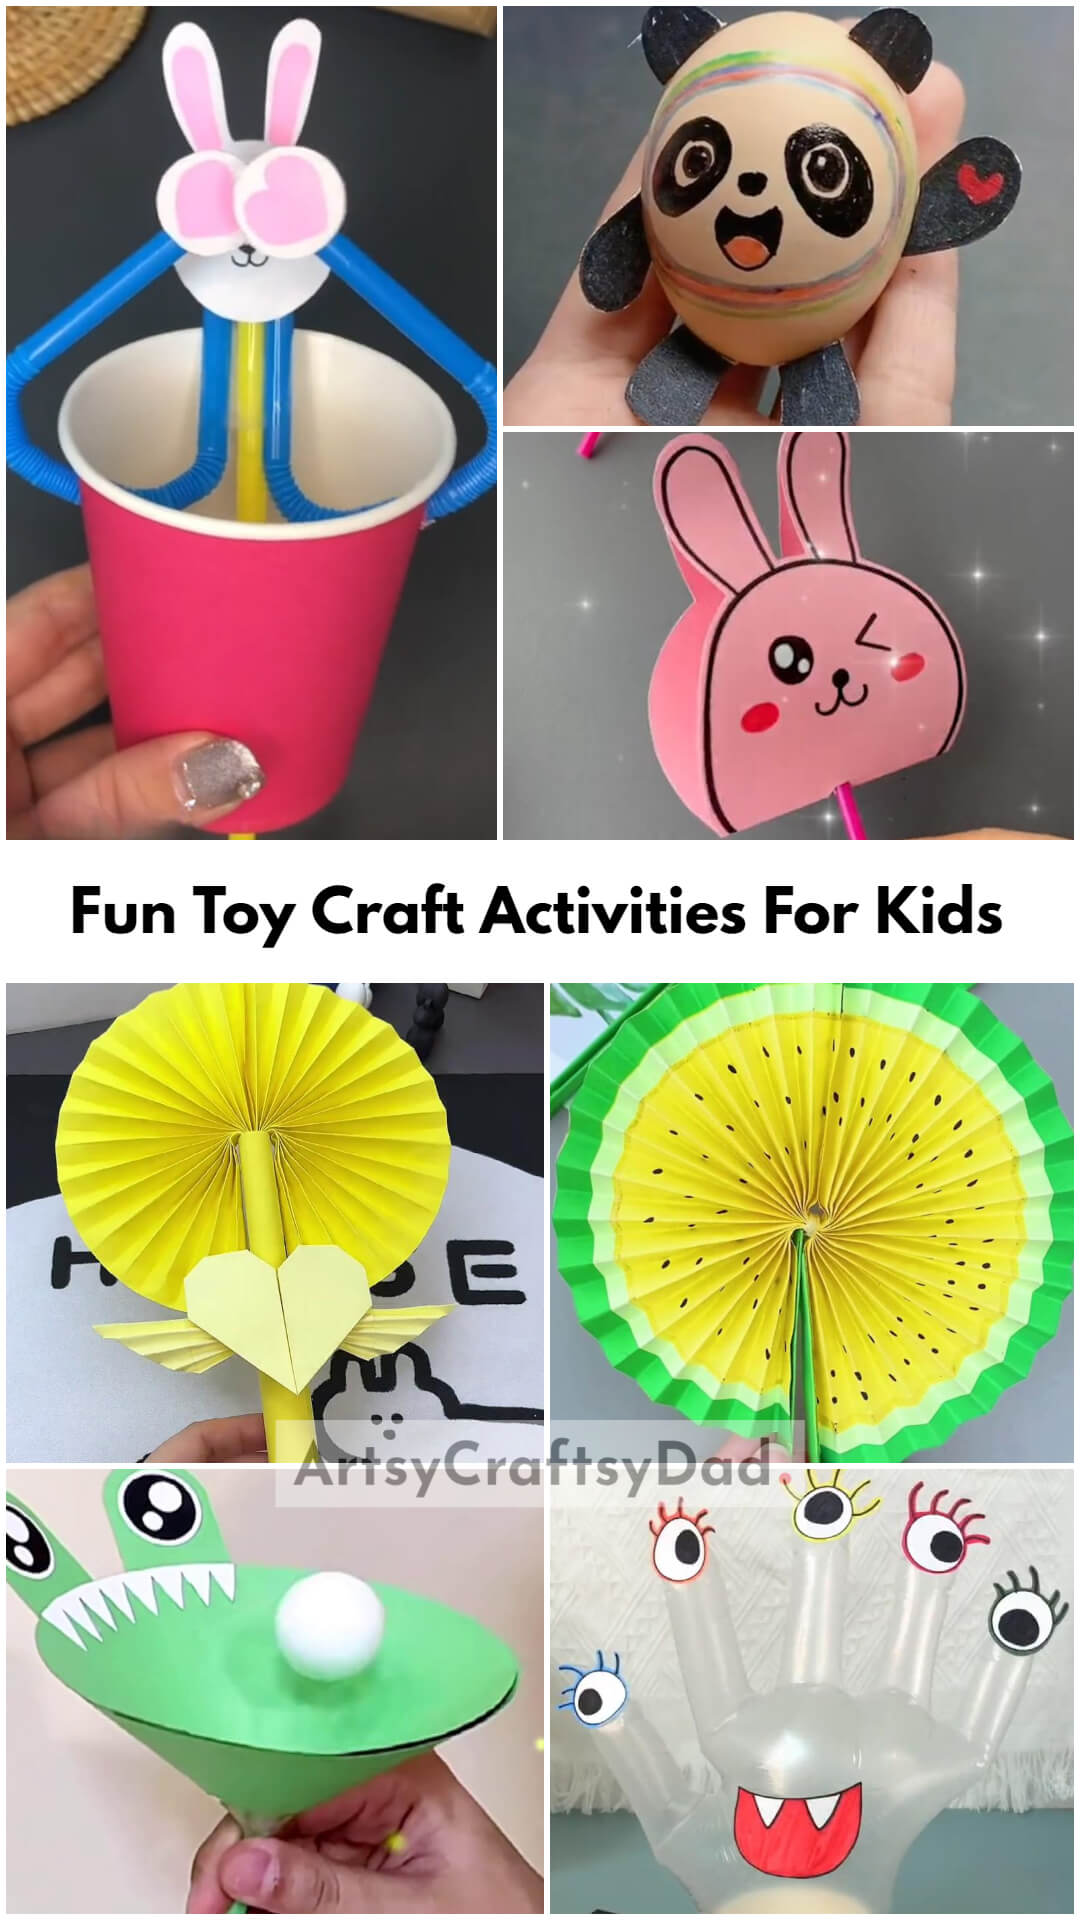 Fun Toy Craft Activities For Kids